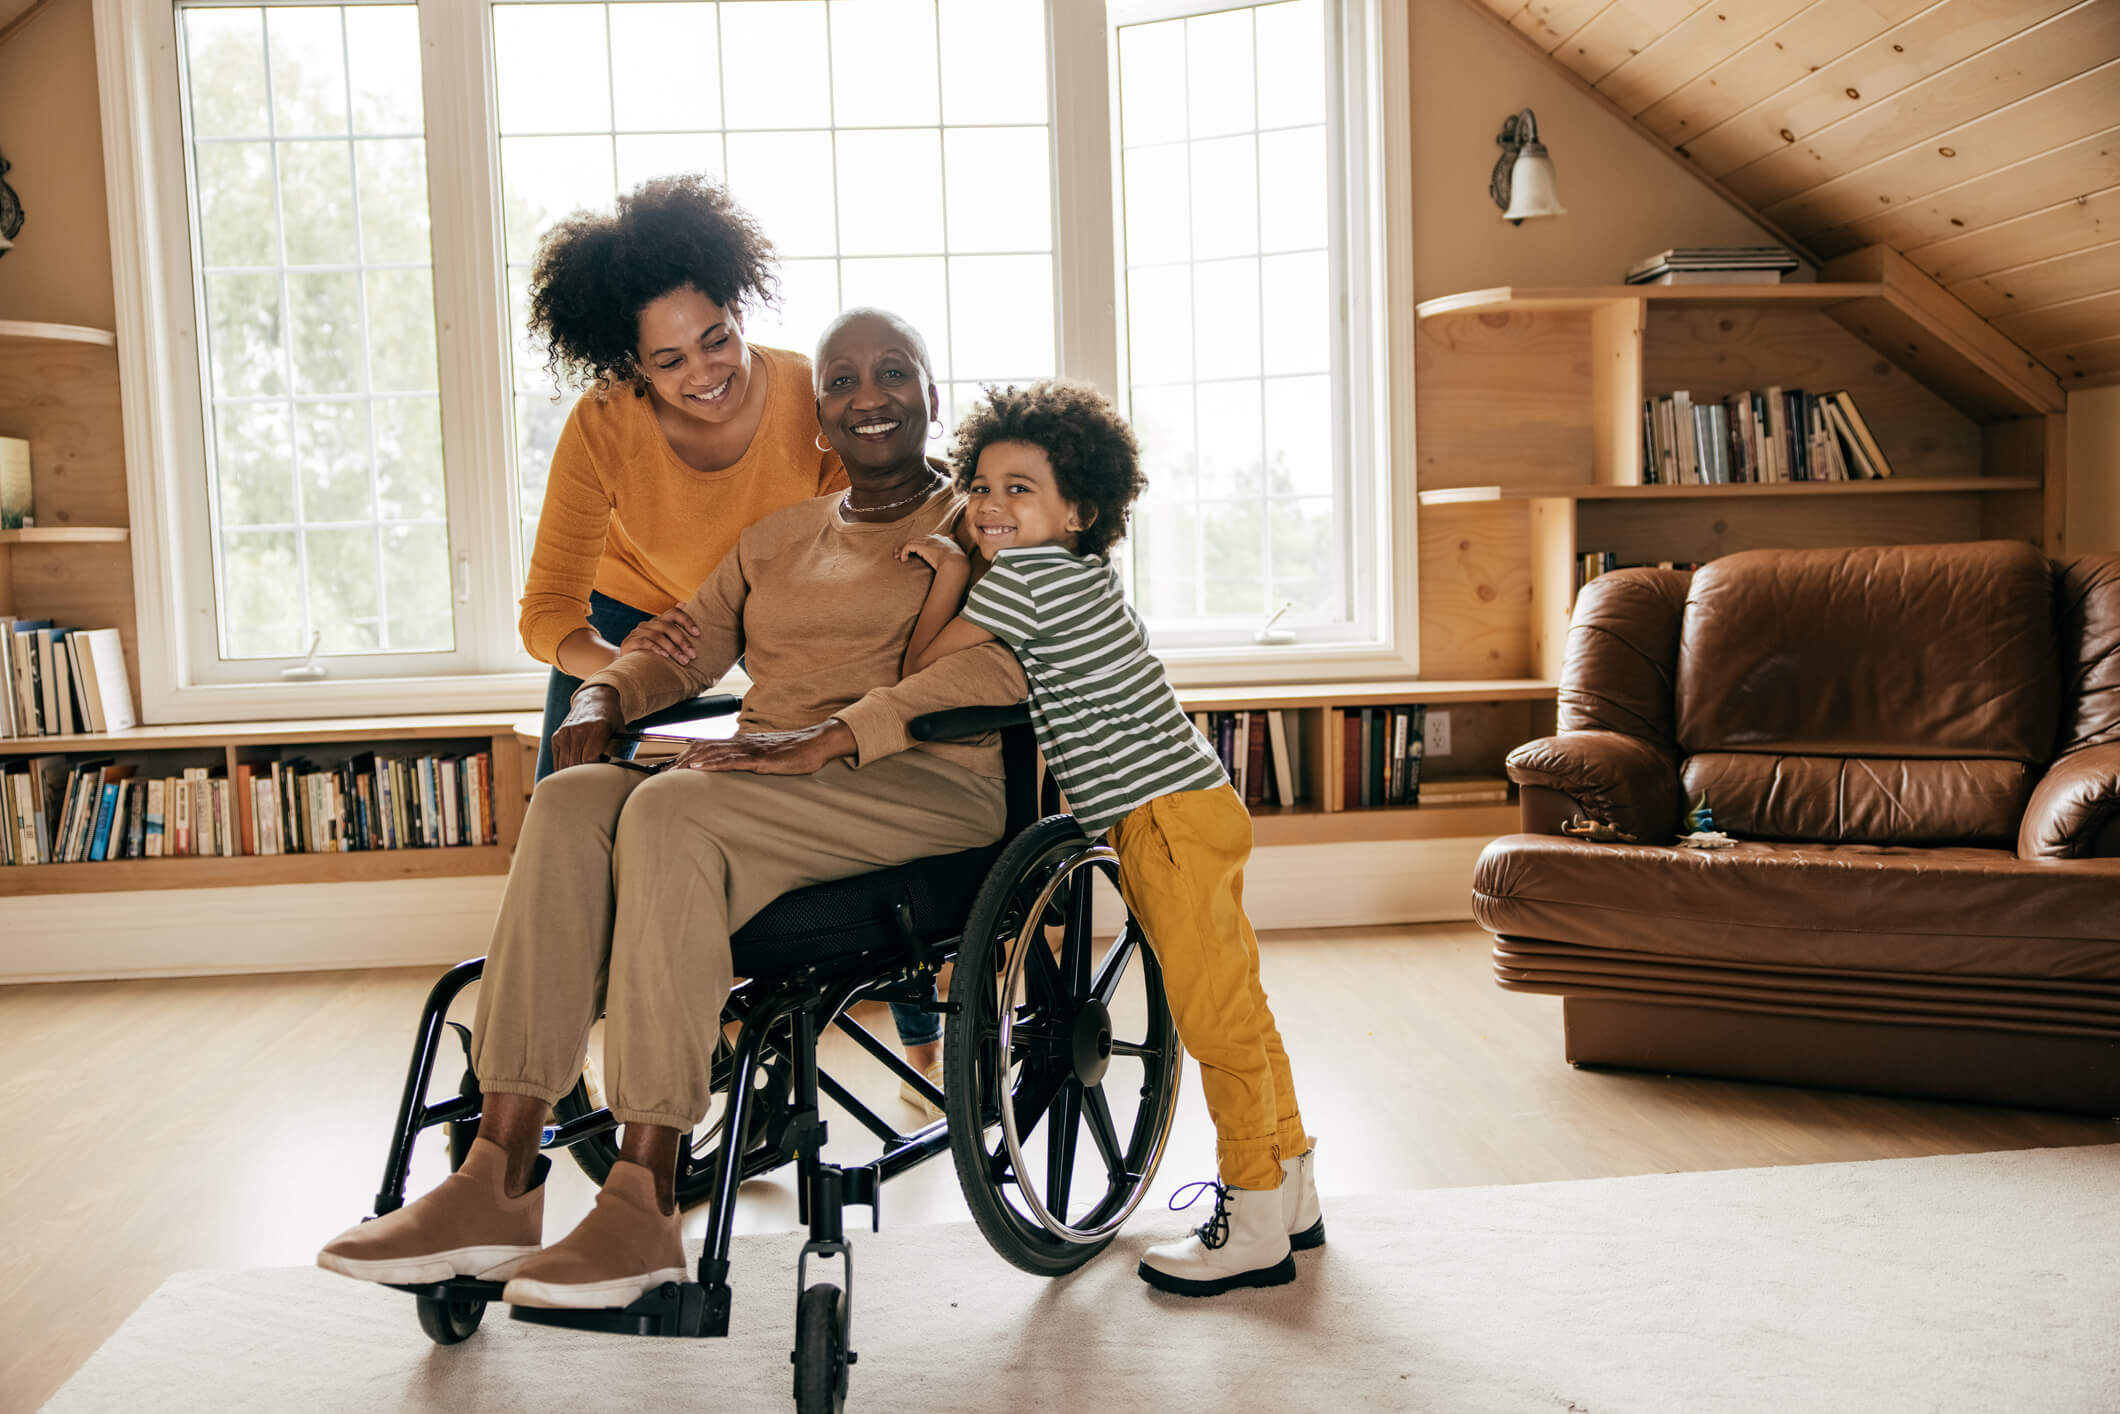 Woman in wheelchair smiling with her adult daughter and grandchild.